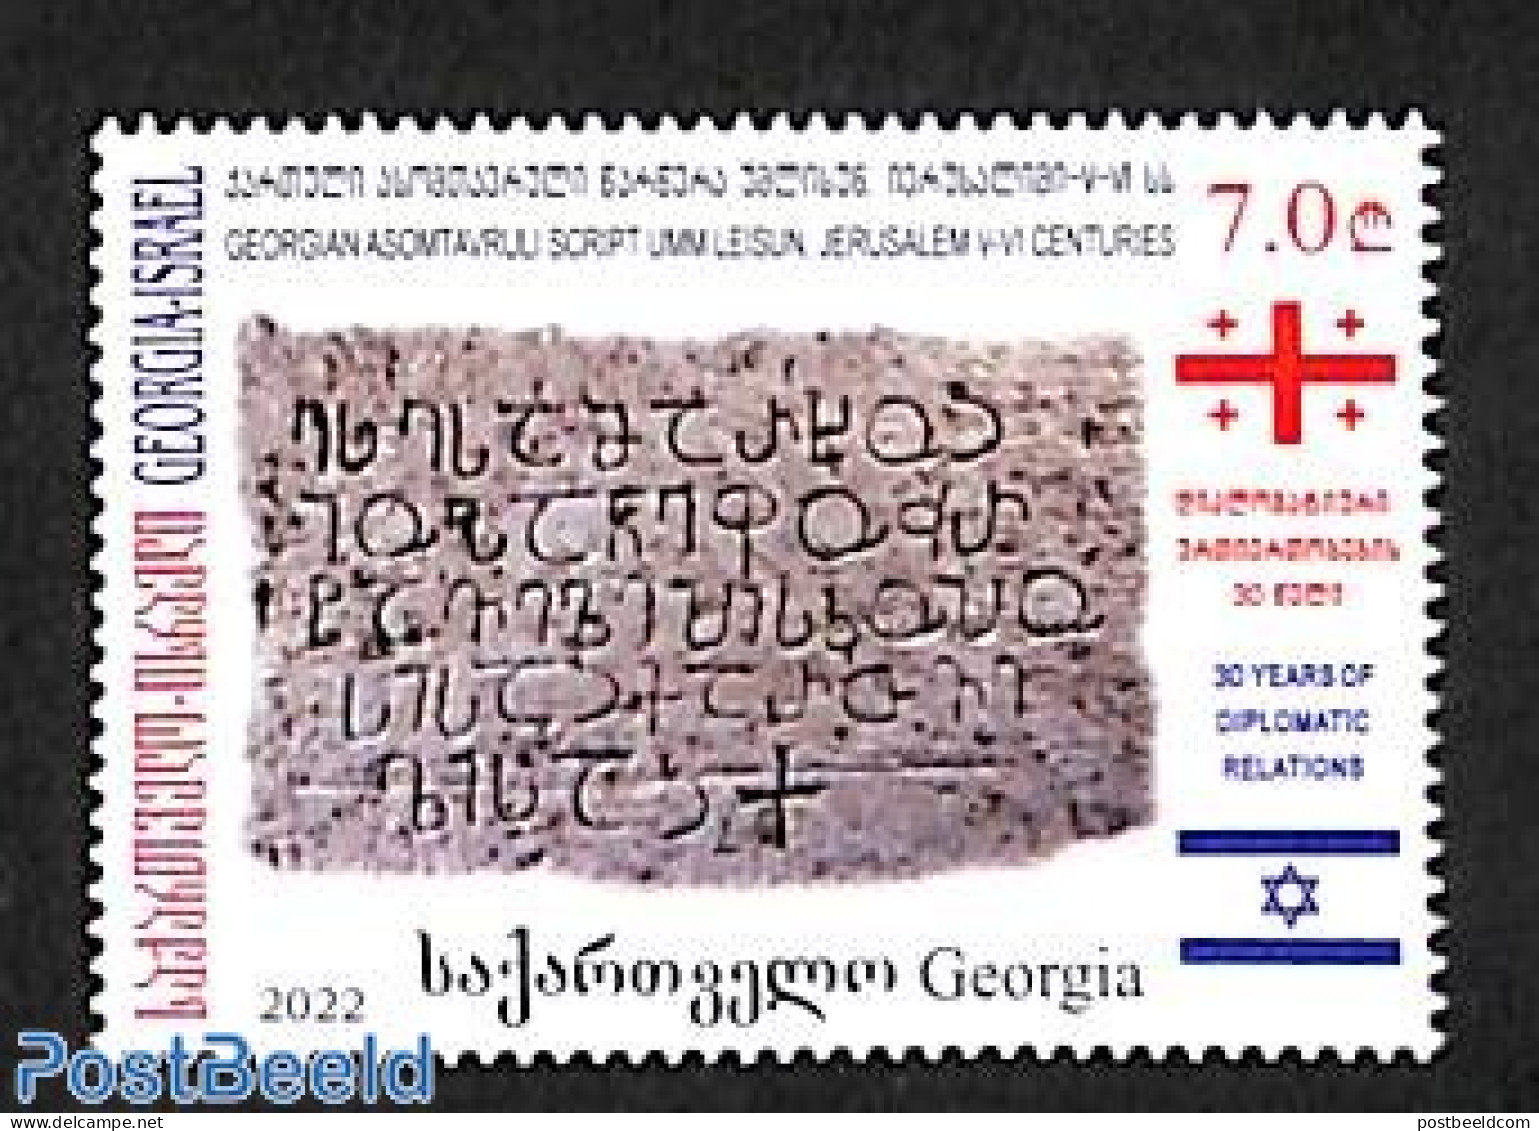 Georgia 2022 Diplomatic Relations With Israel 1v, Mint NH, Art - Handwriting And Autographs - Georgia